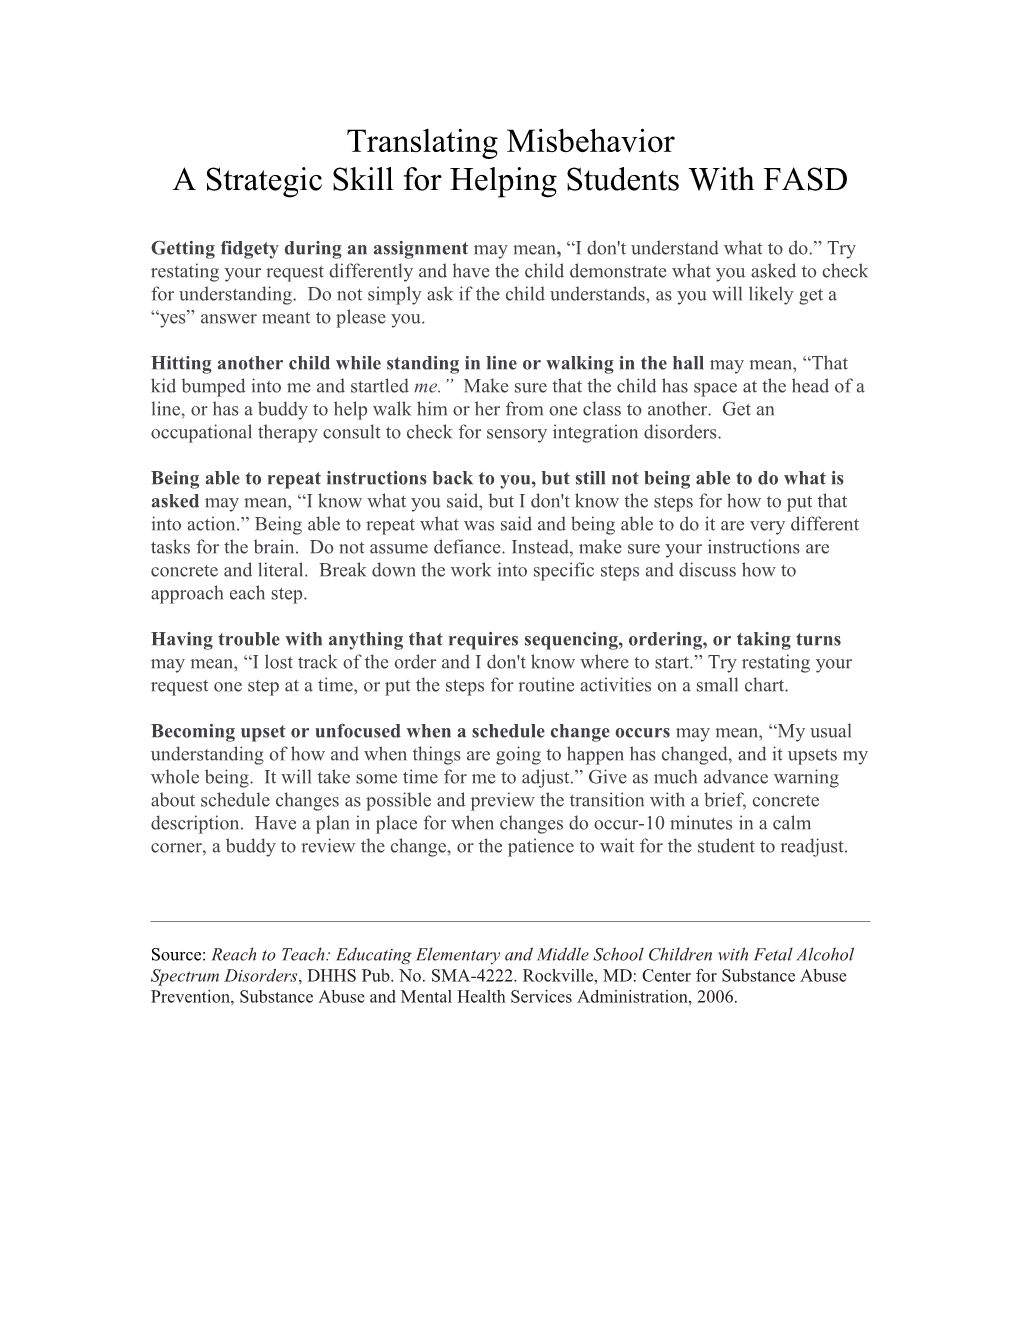 A Strategic Skill for Helping Students with FASD